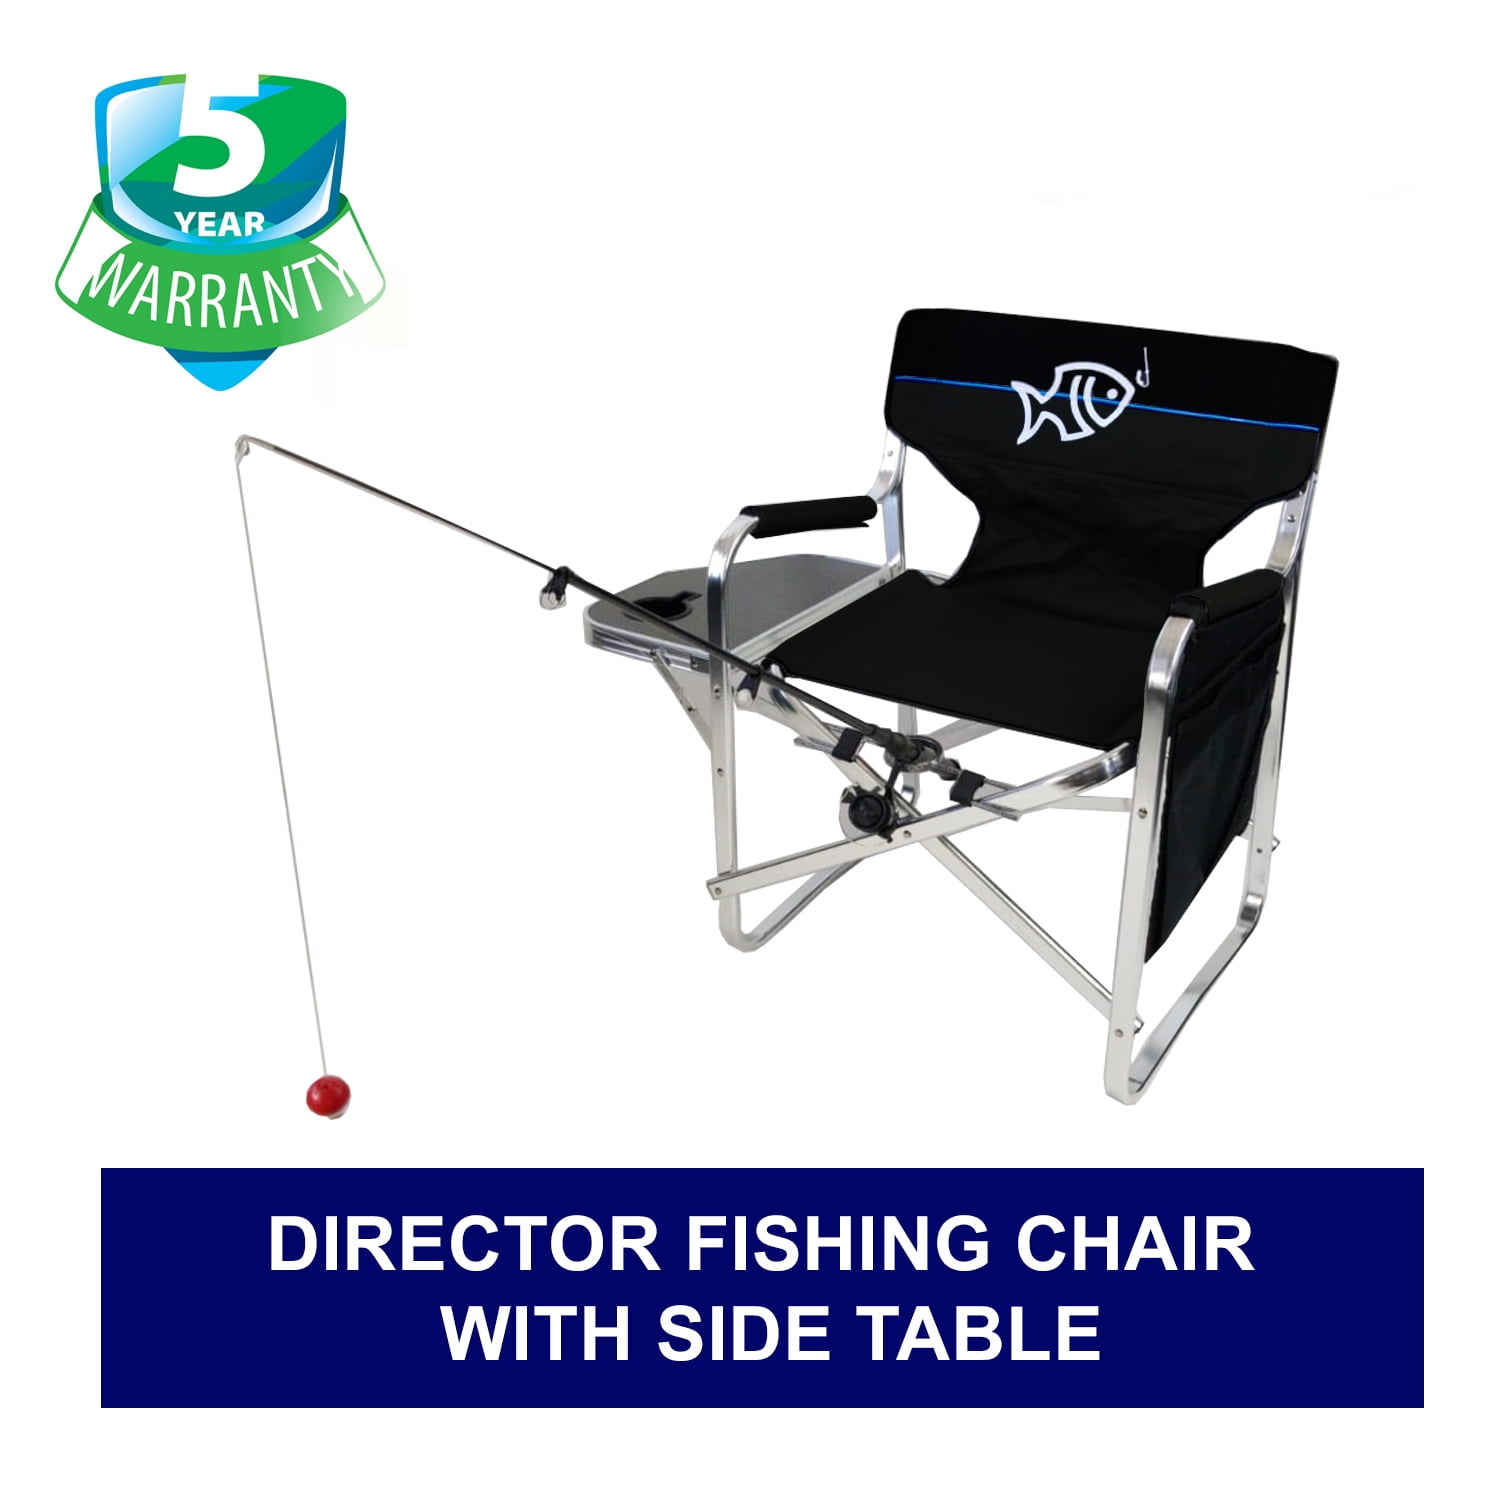 Tuscany Pro Oasis Premium Director Fishing Chair with Rod Holder